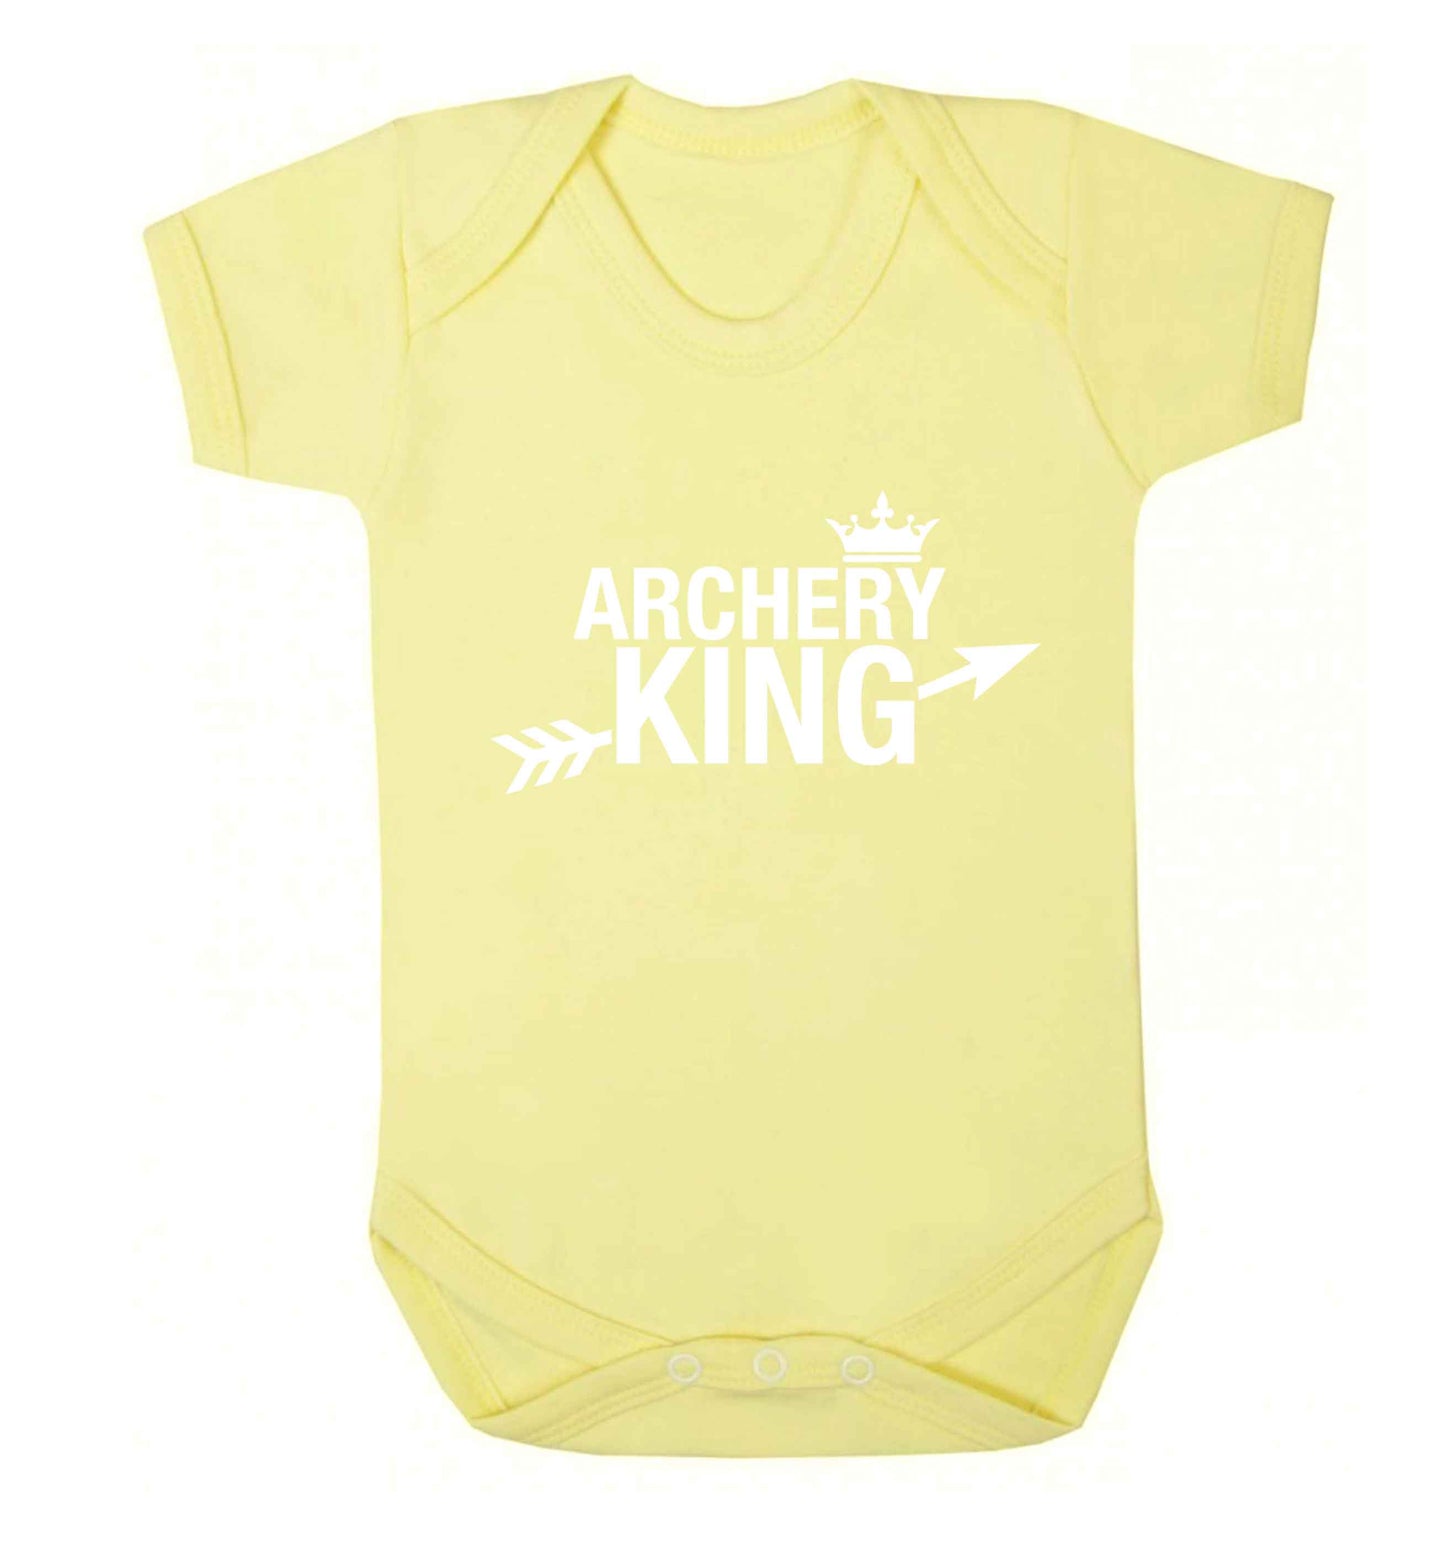 Archery king Baby Vest pale yellow 18-24 months